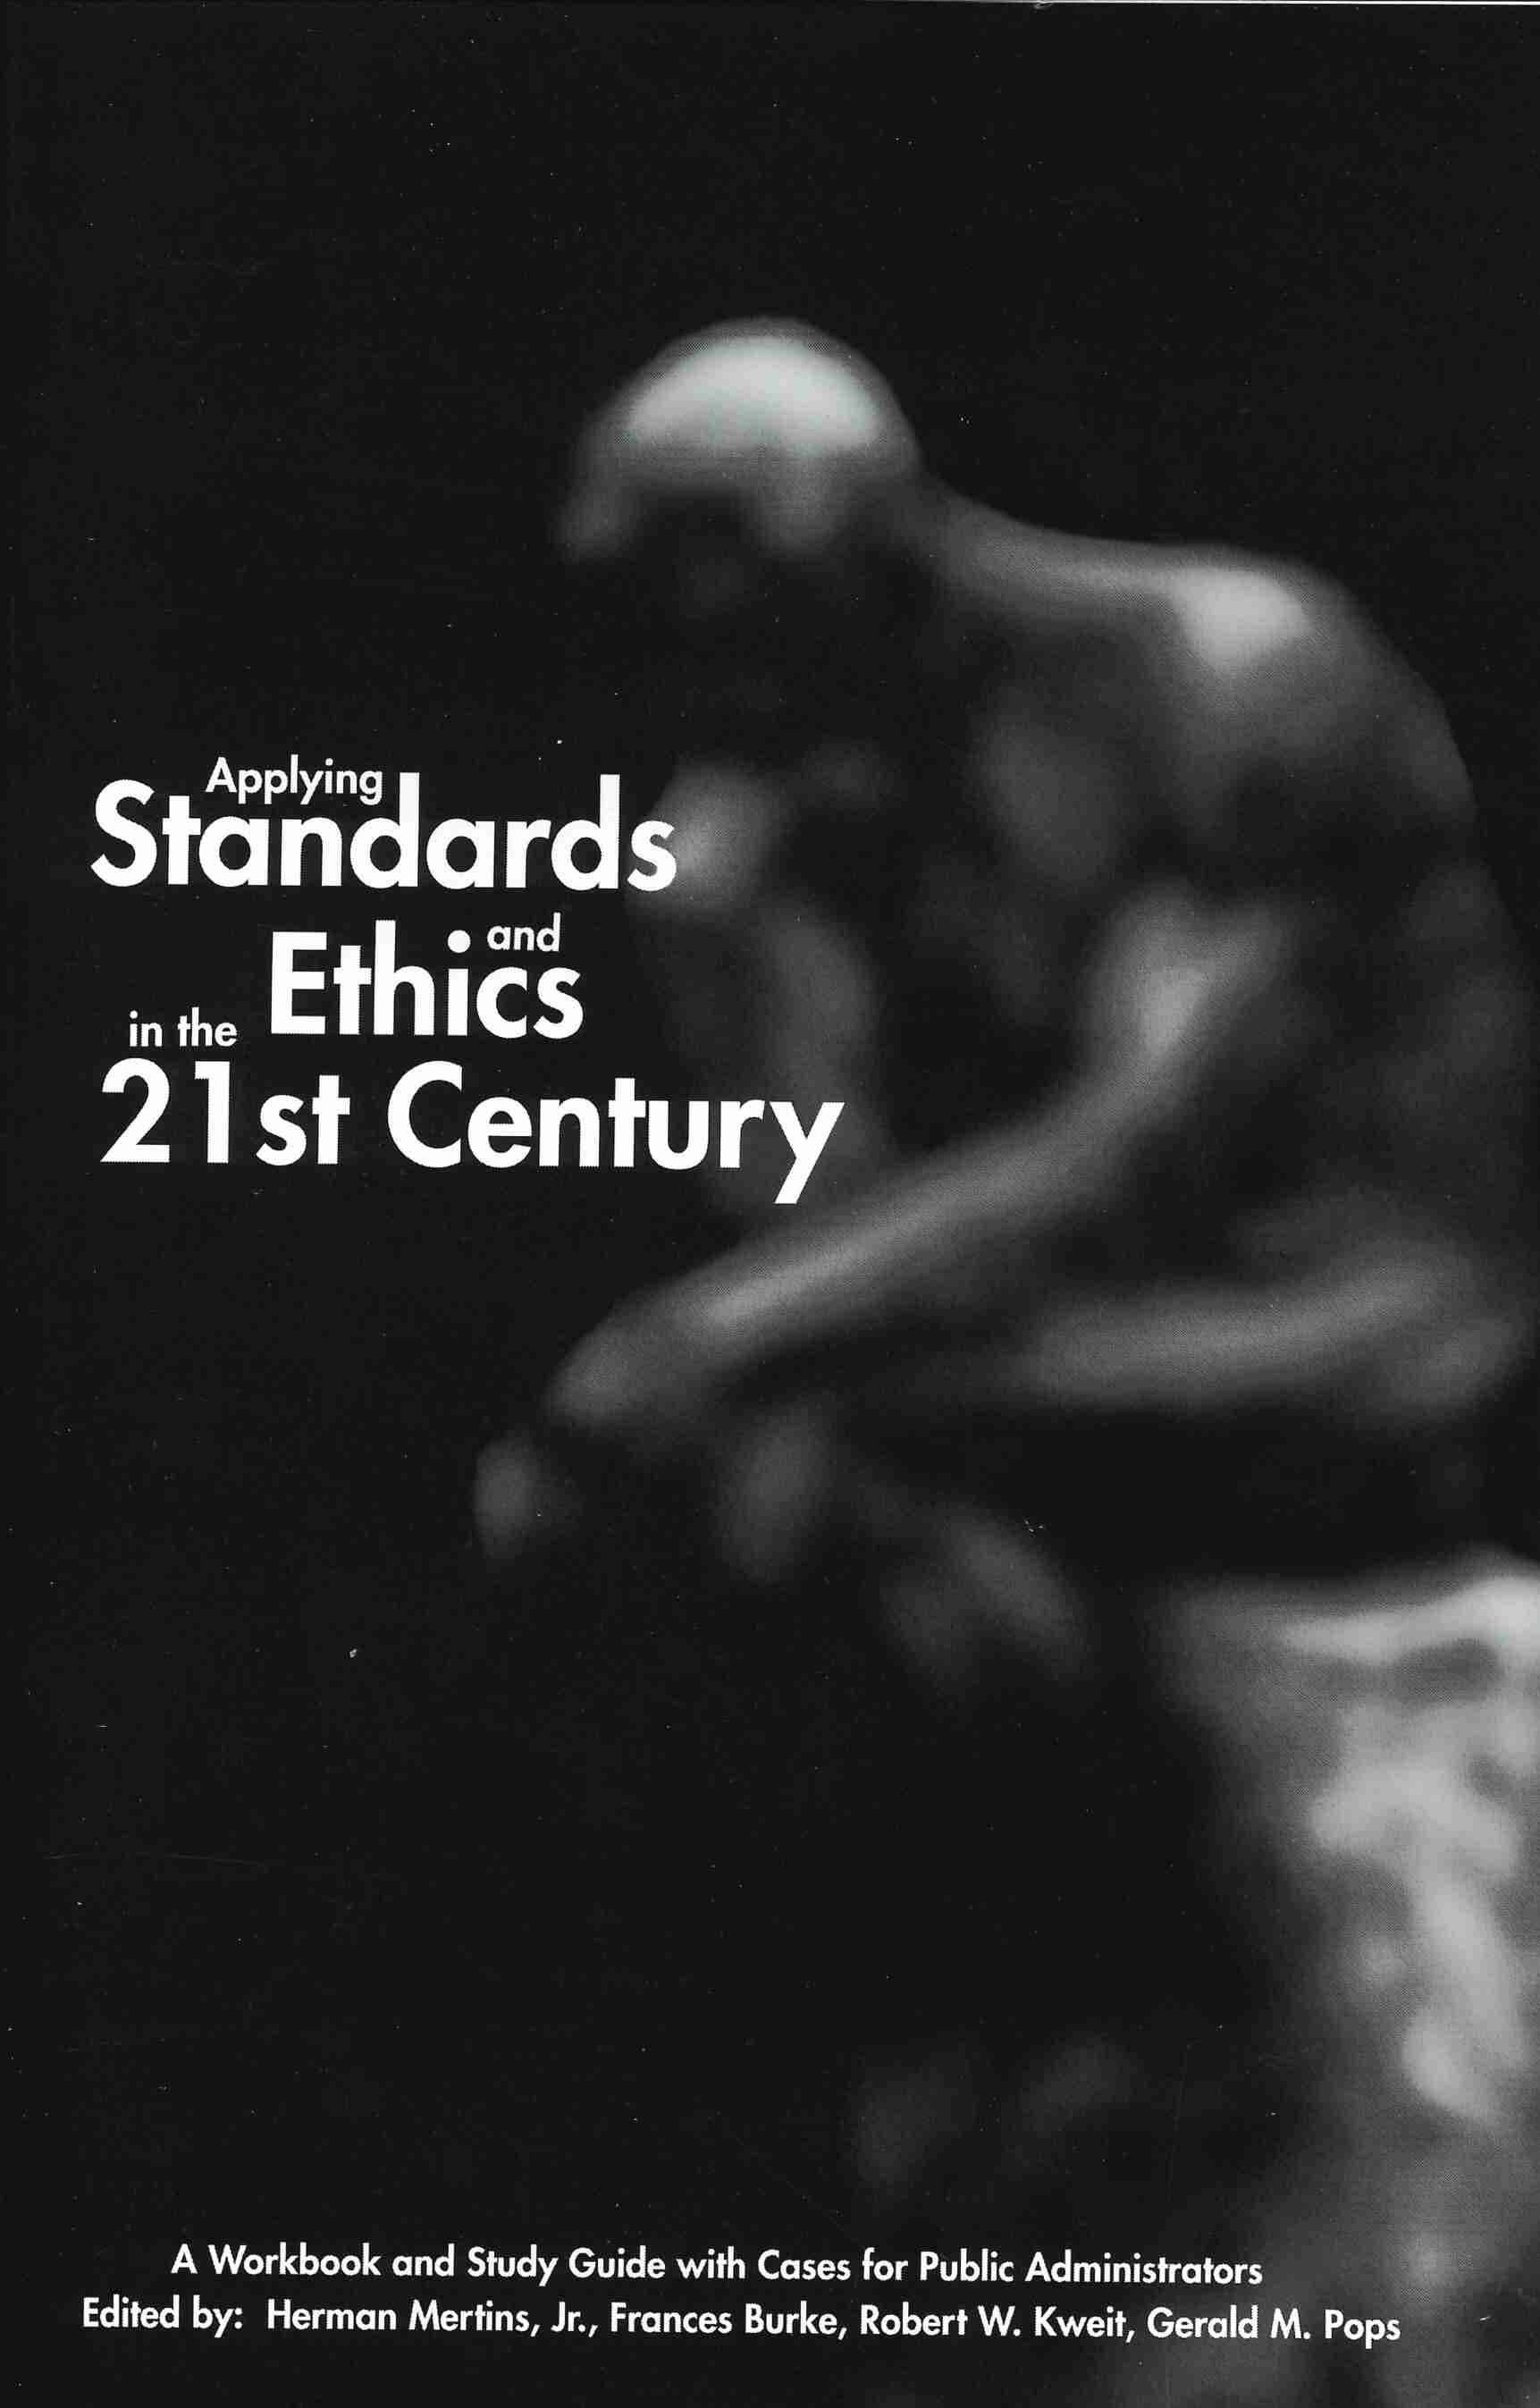 Applying Standards and Ethics in the 21st Century